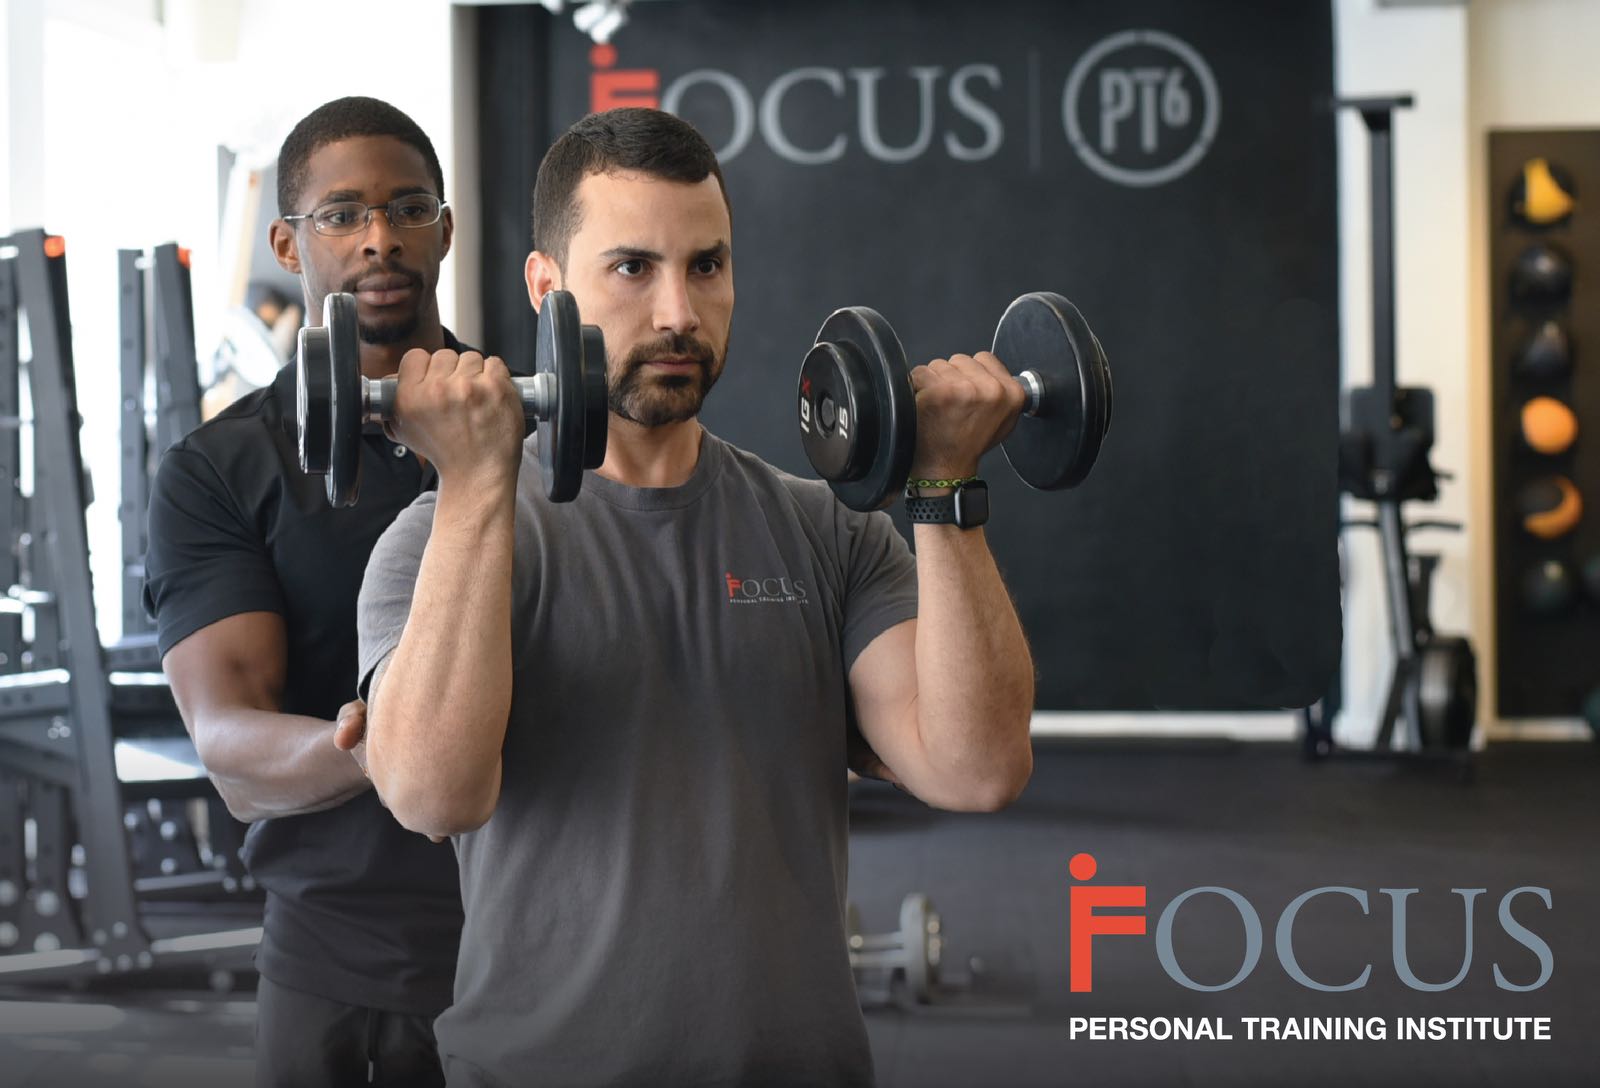 How Focus Personal Training Institute can help to get certification